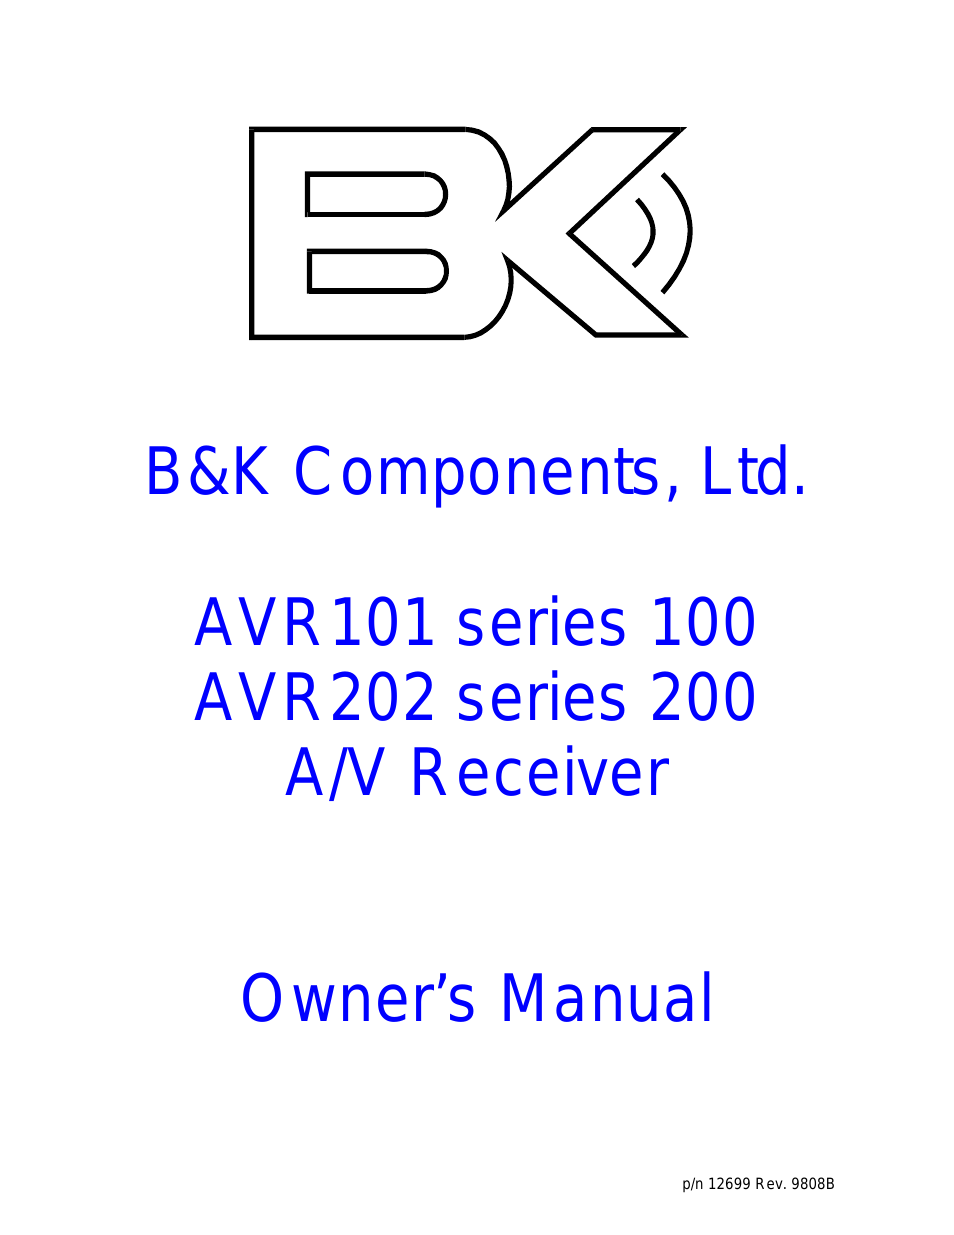 AVR202 series 200 (Page 1)